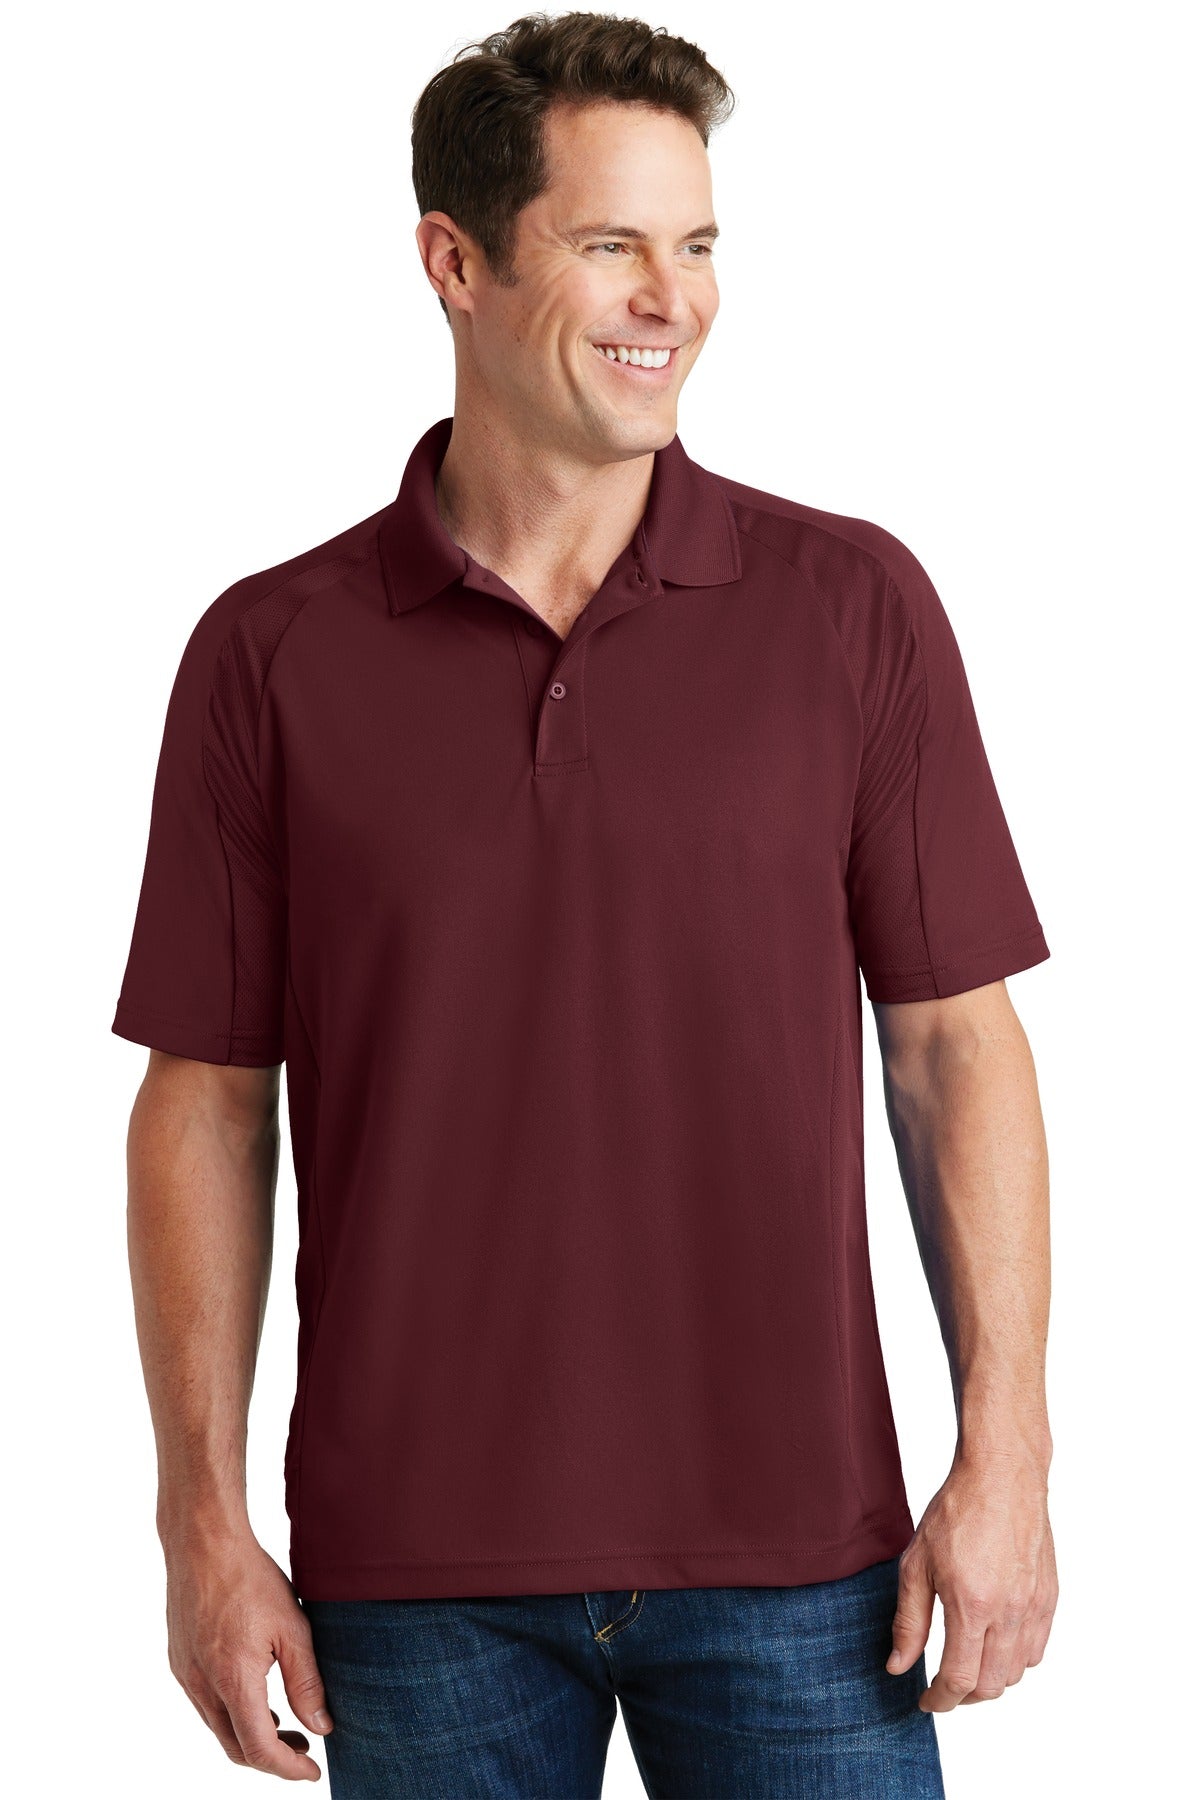 Photo of Sport-Tek Polos/Knits T474  color  Maroon